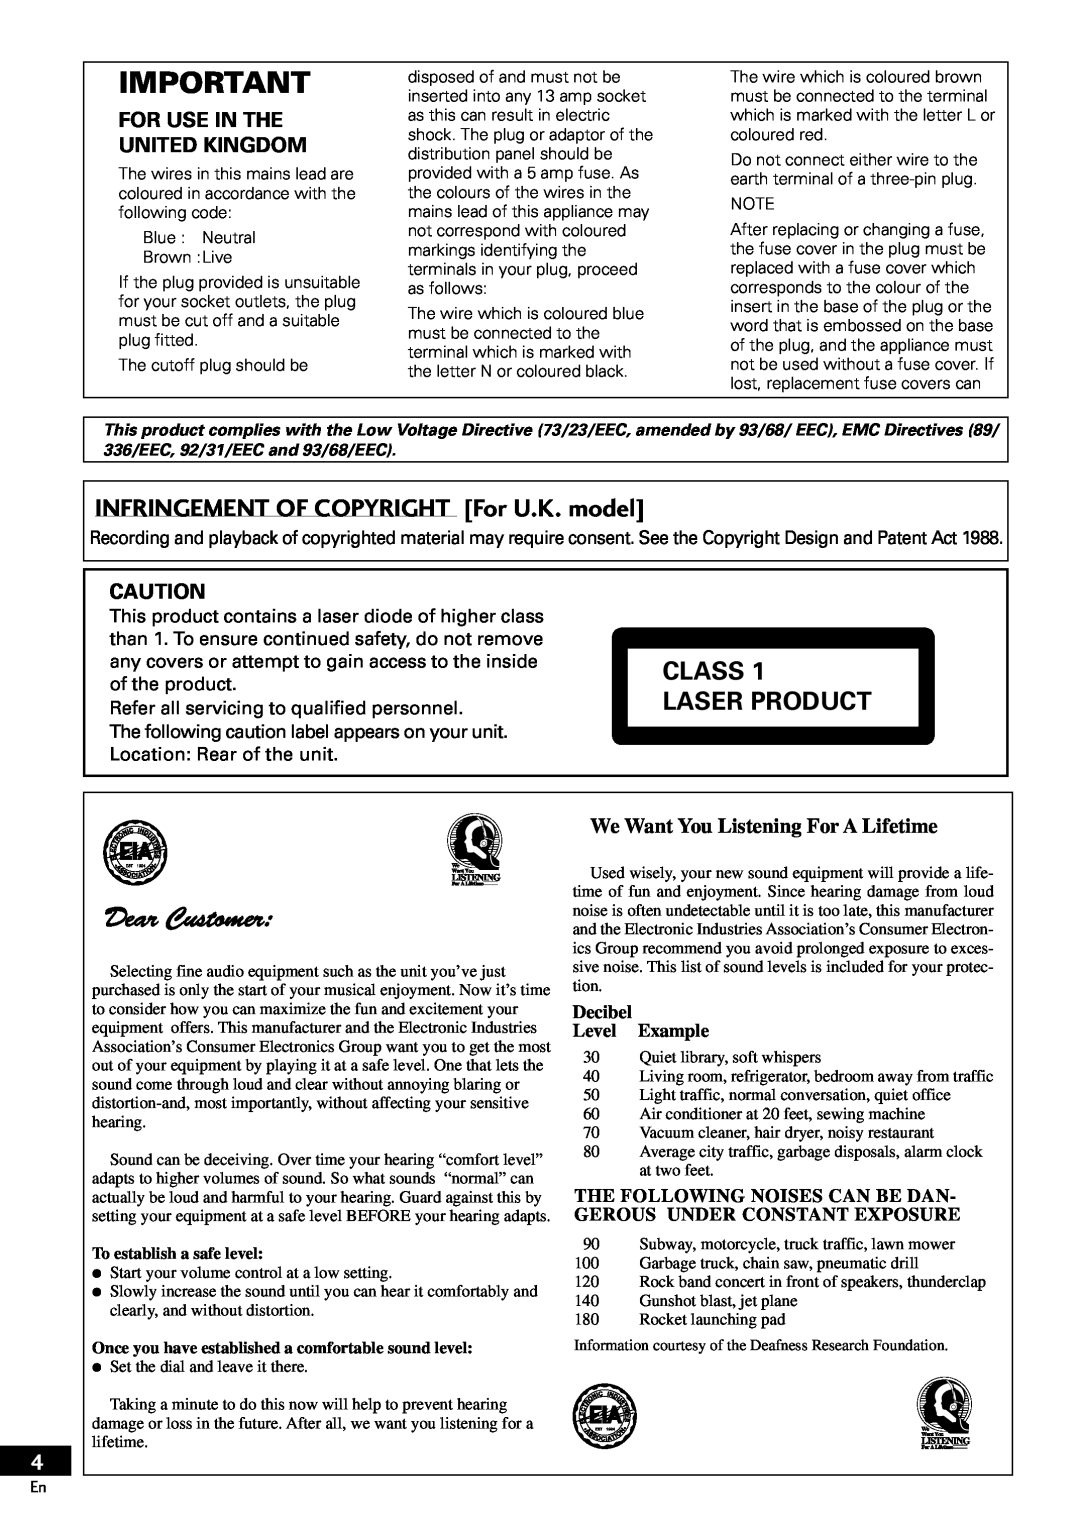 Pioneer PDR-609 INFRINGEMENT OF COPYRIGHT For U.K. model, Class Laser Product, For Use In The, United Kingdom 